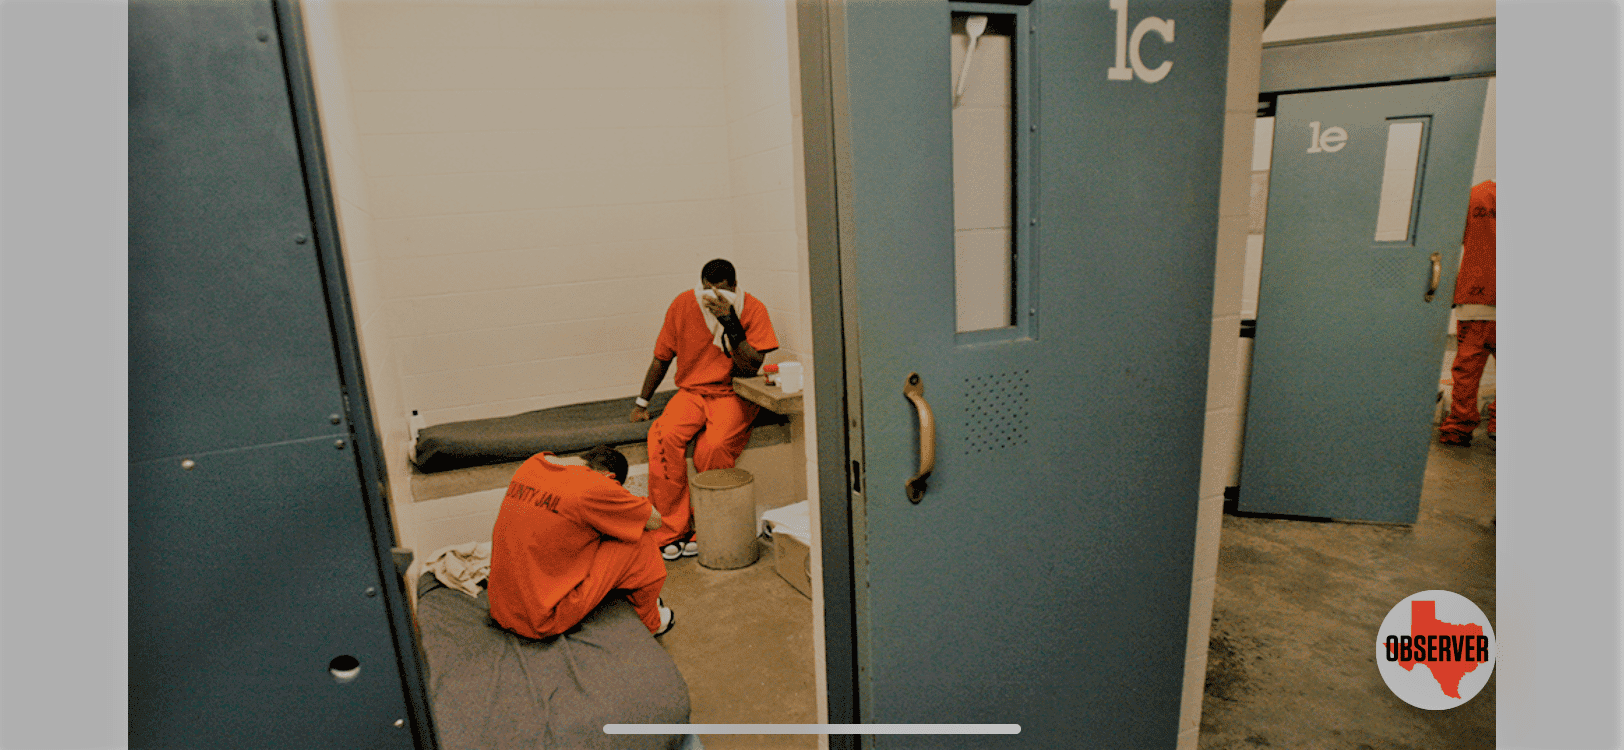 American Prisons in Crisis